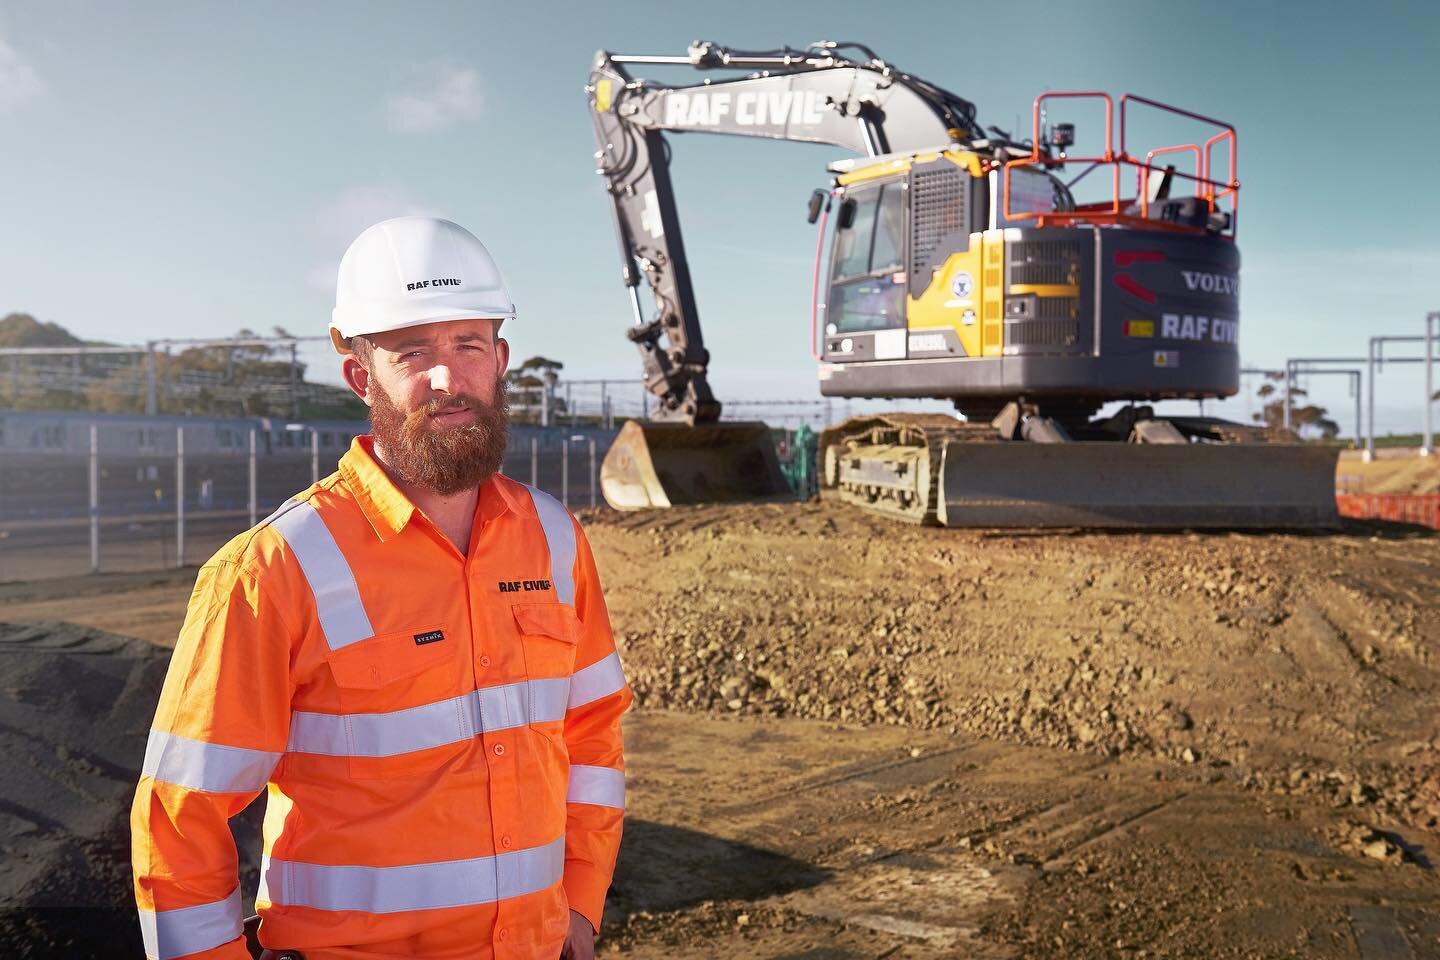 Out onsite to capture a portrait of Adrian from @raf_civil for their feature in the latest issue of @australian_earthmoving magazine. 

Get in touch for all your Construction, Earthmoving, Heavy machinery, Demolition and Industrial imagery and video 